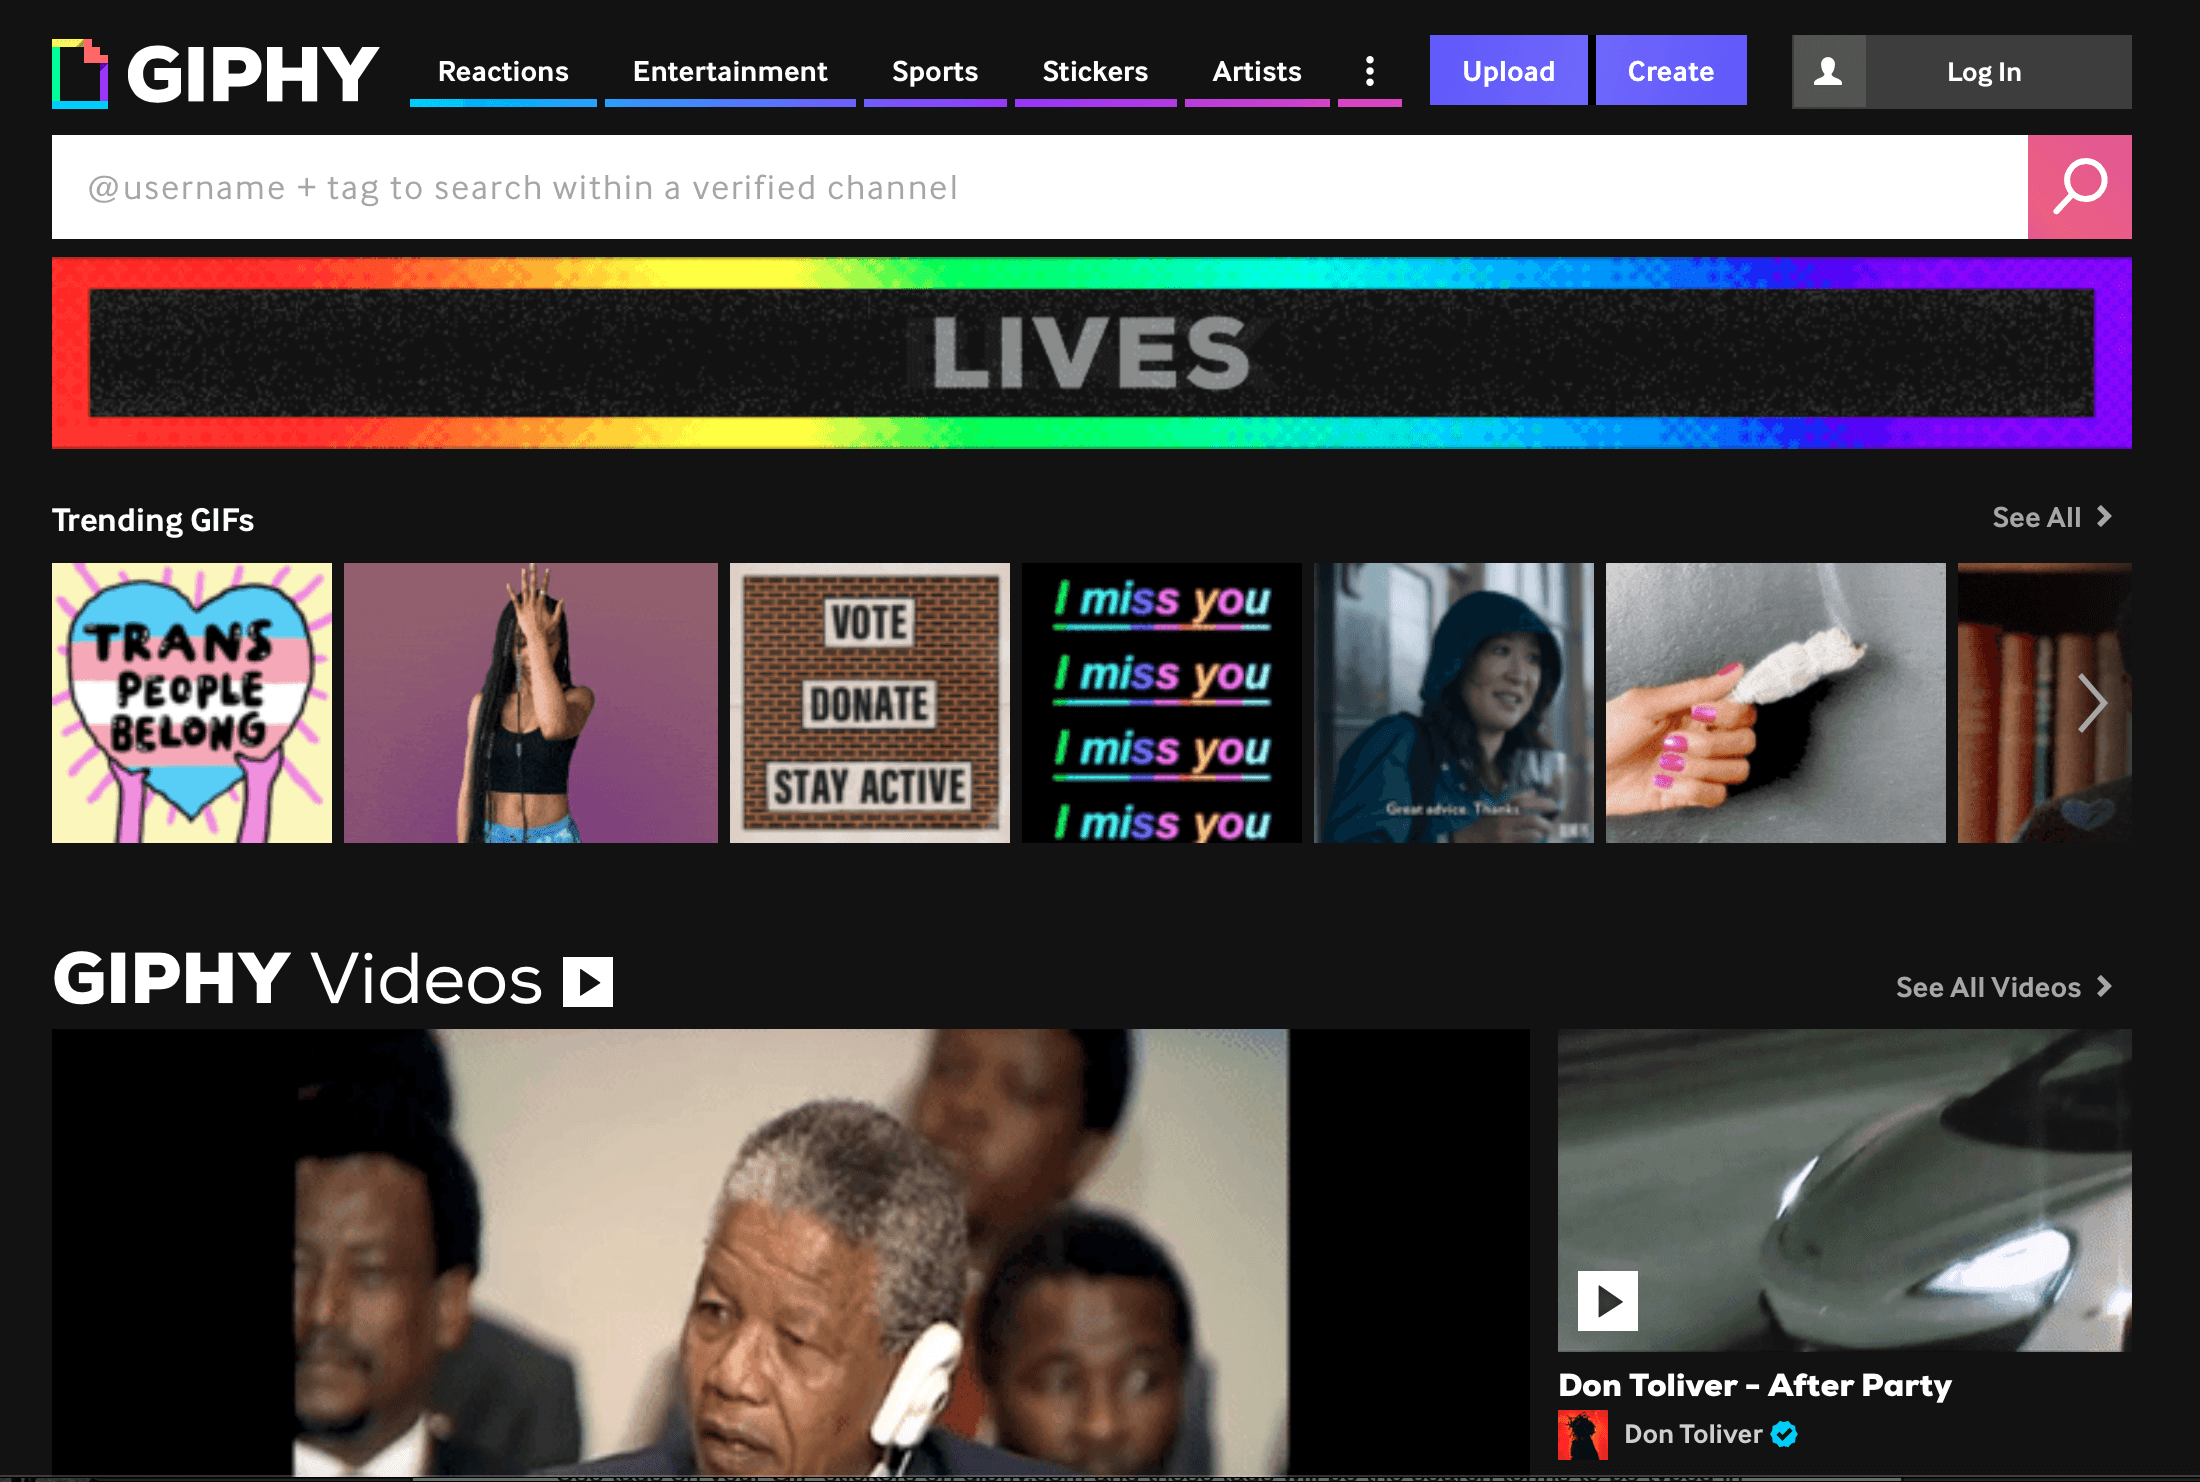 giphy.com homepage with Log In button in the top right-hand corner